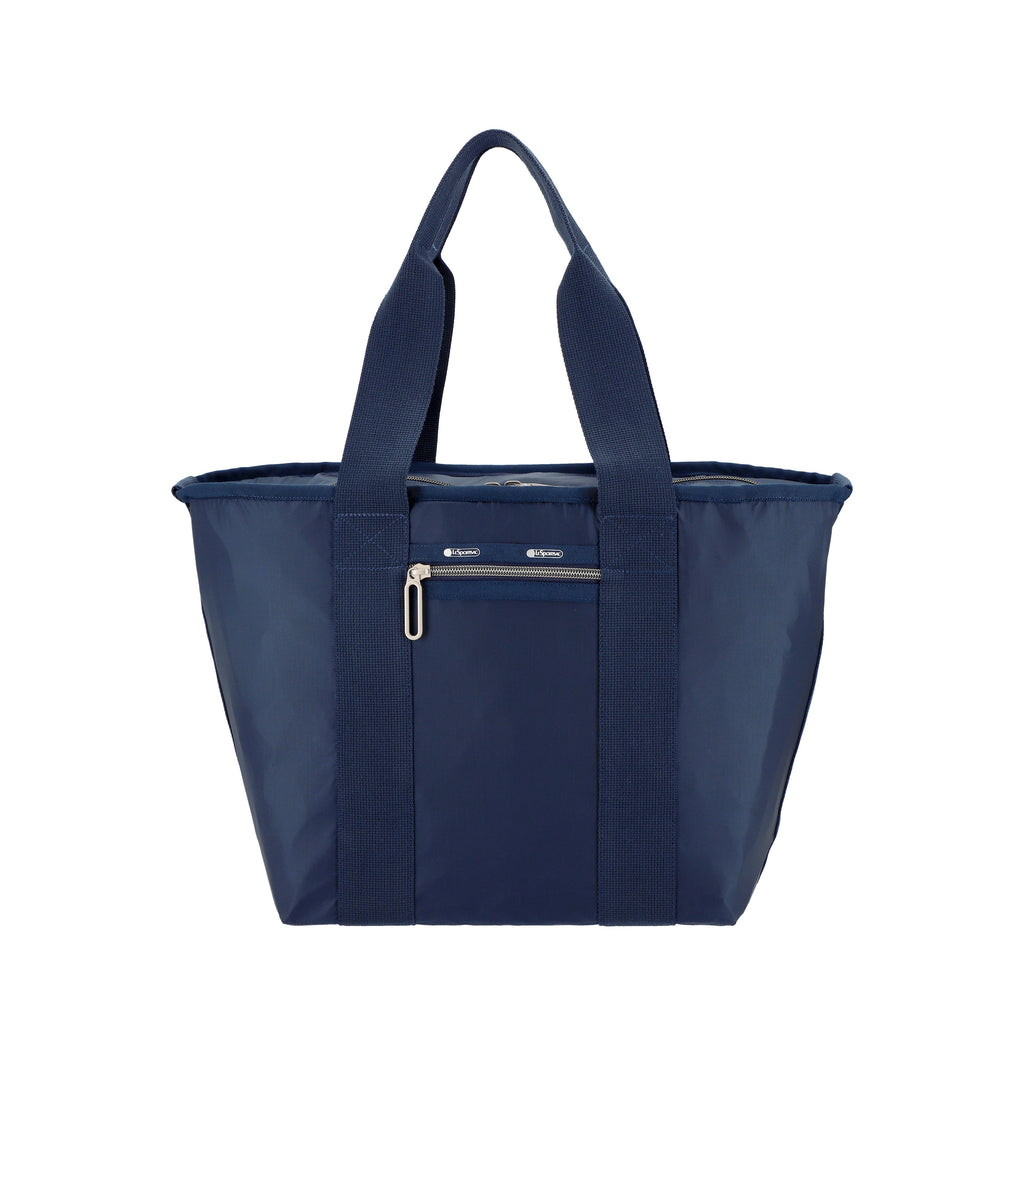 Essential East/West Tote - 24642702409776